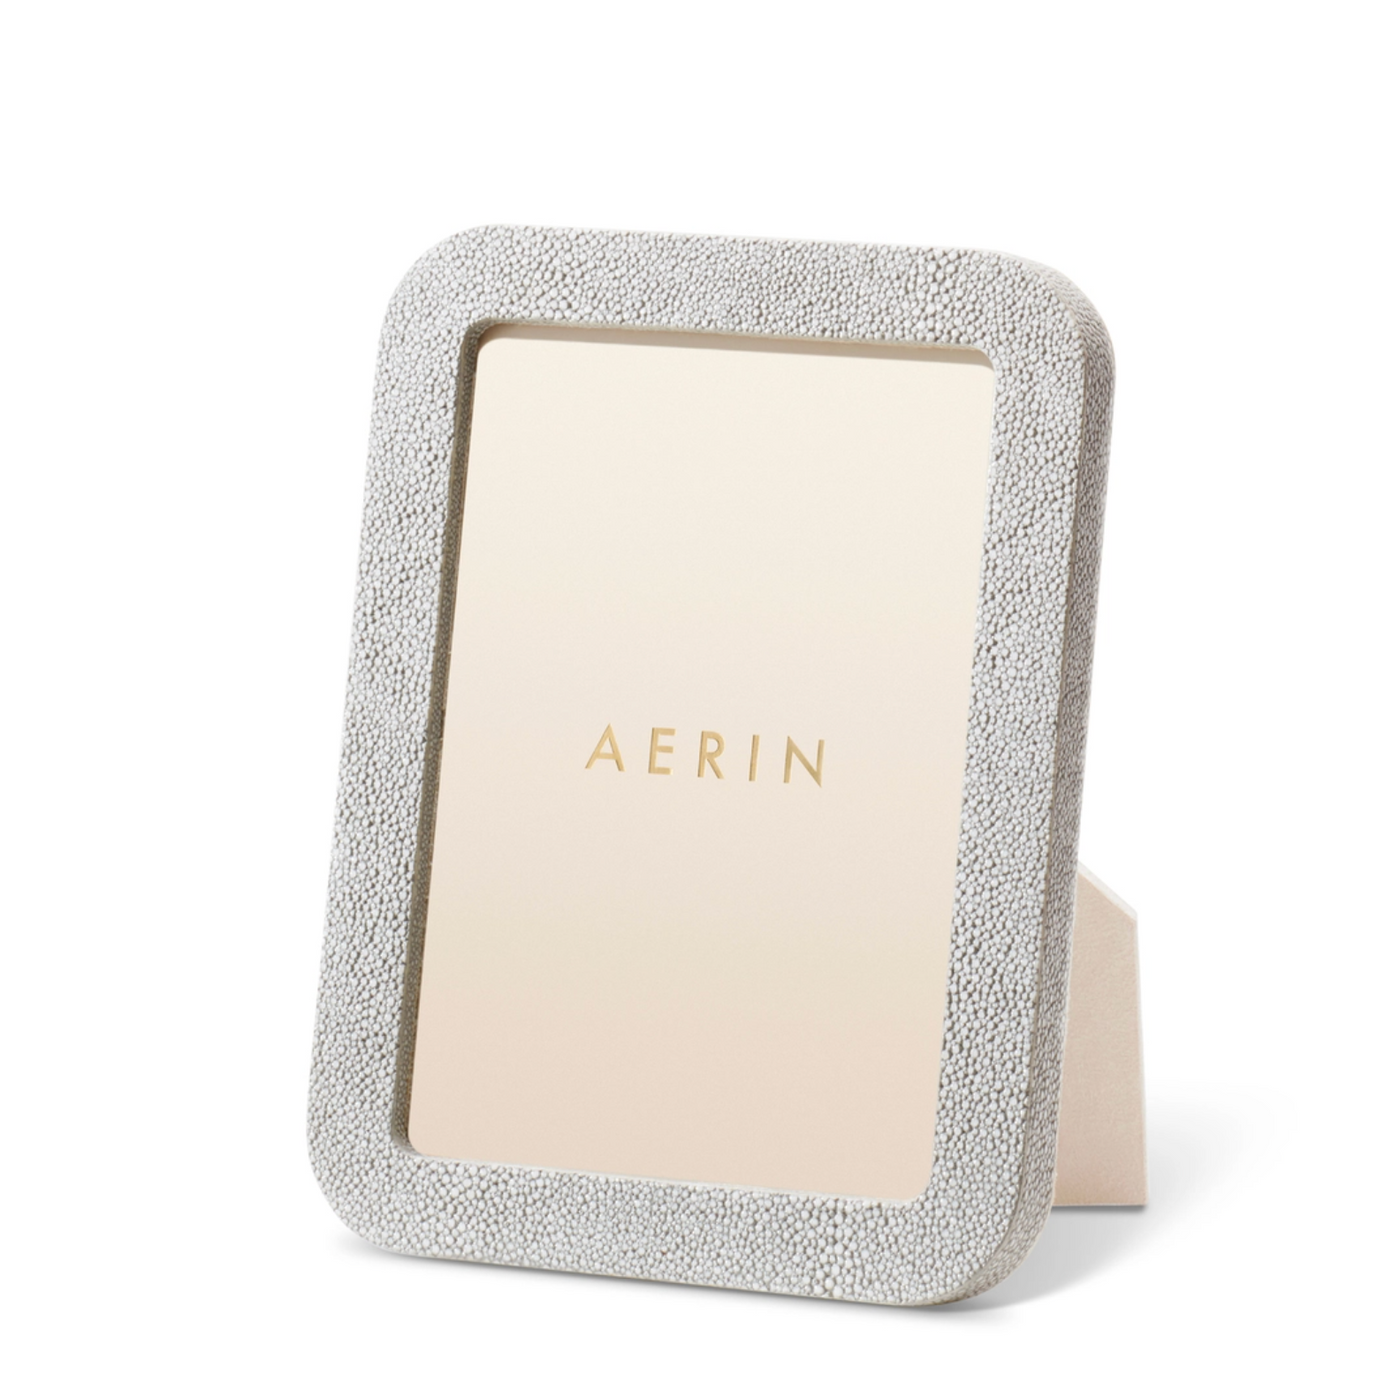 AERIN FRAME MODERN SHAGREEN DOVE (Available in 3 Sizes)